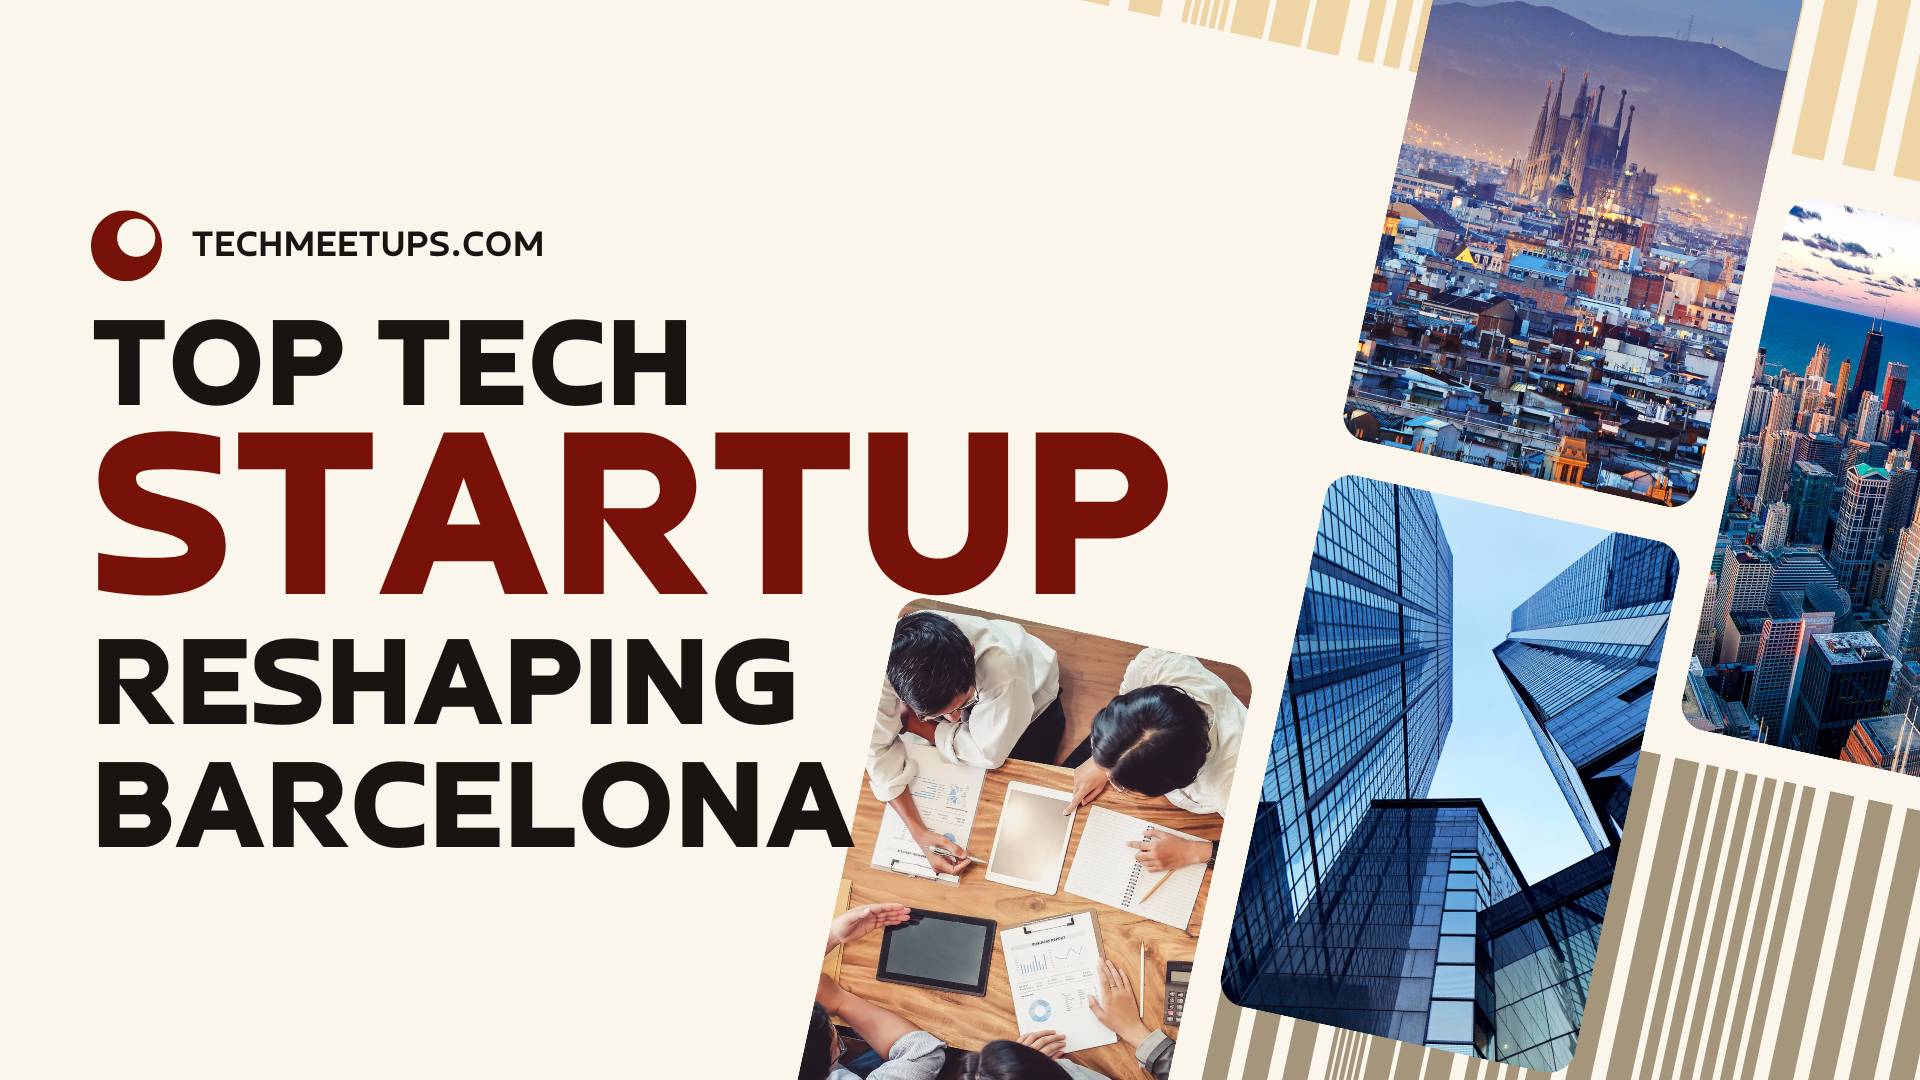 The Top Tech Startups Reshaping Barcelona